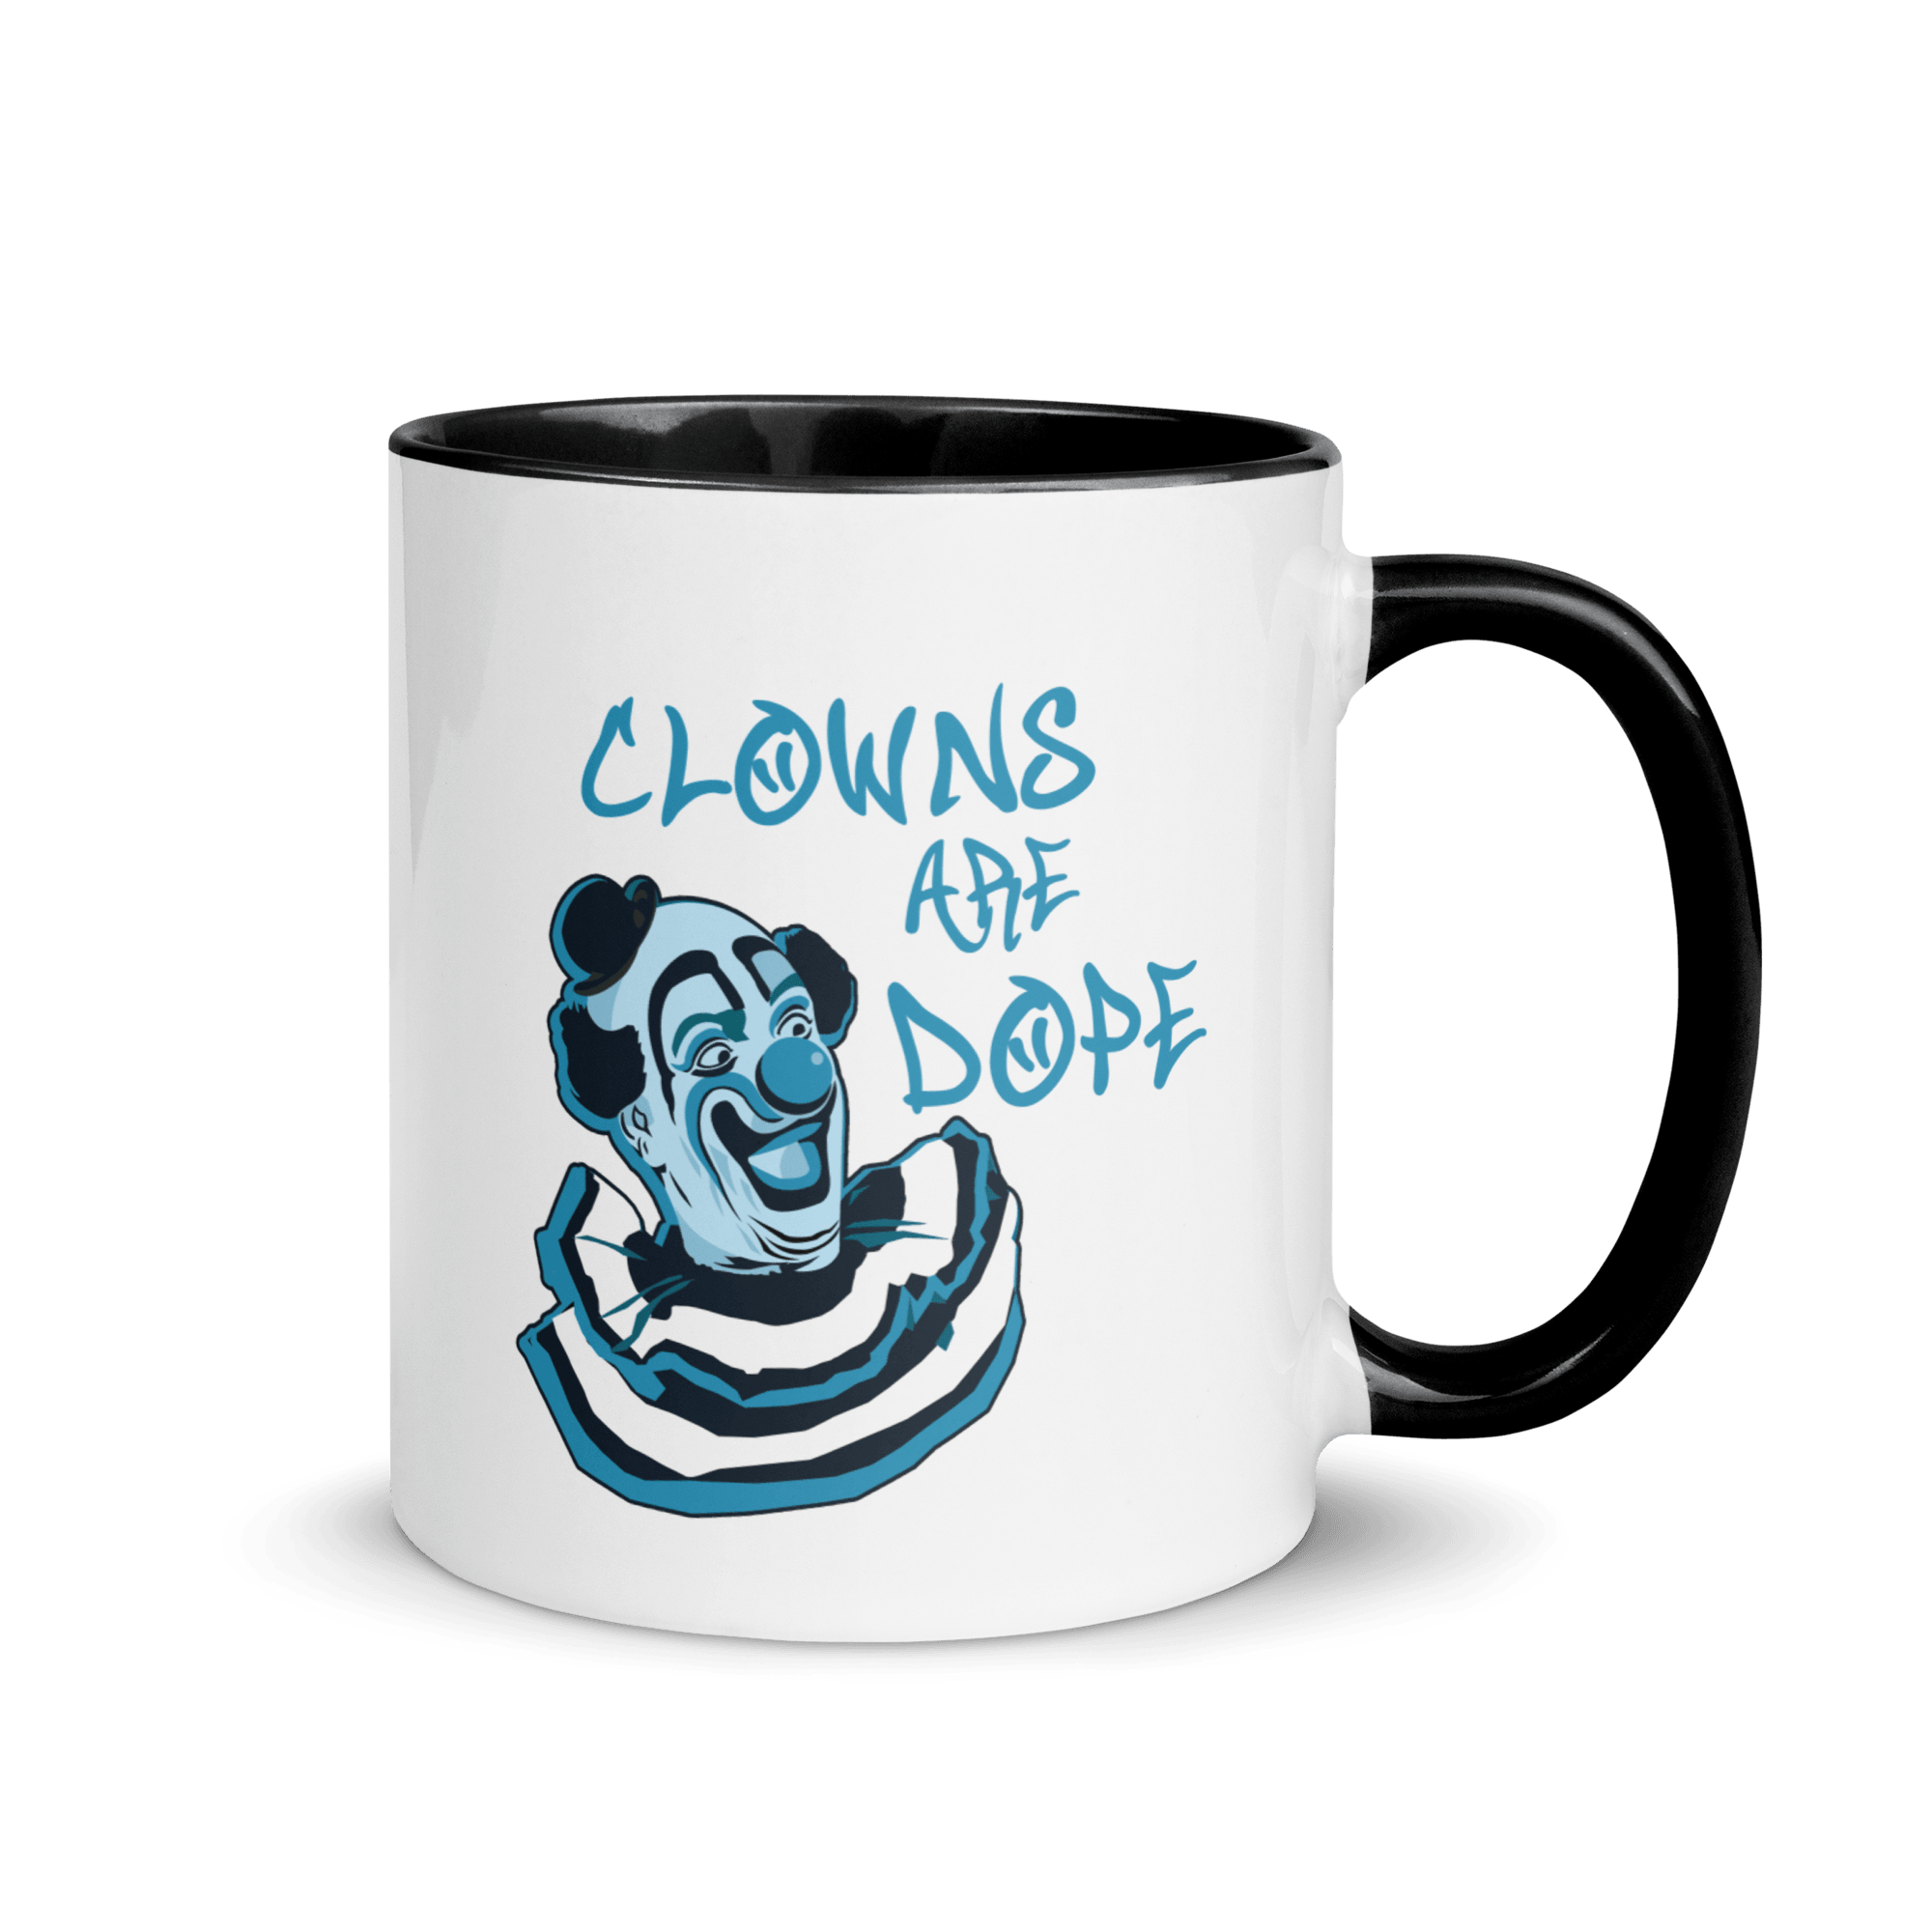 Clowns Are Dope Mug with Color Inside